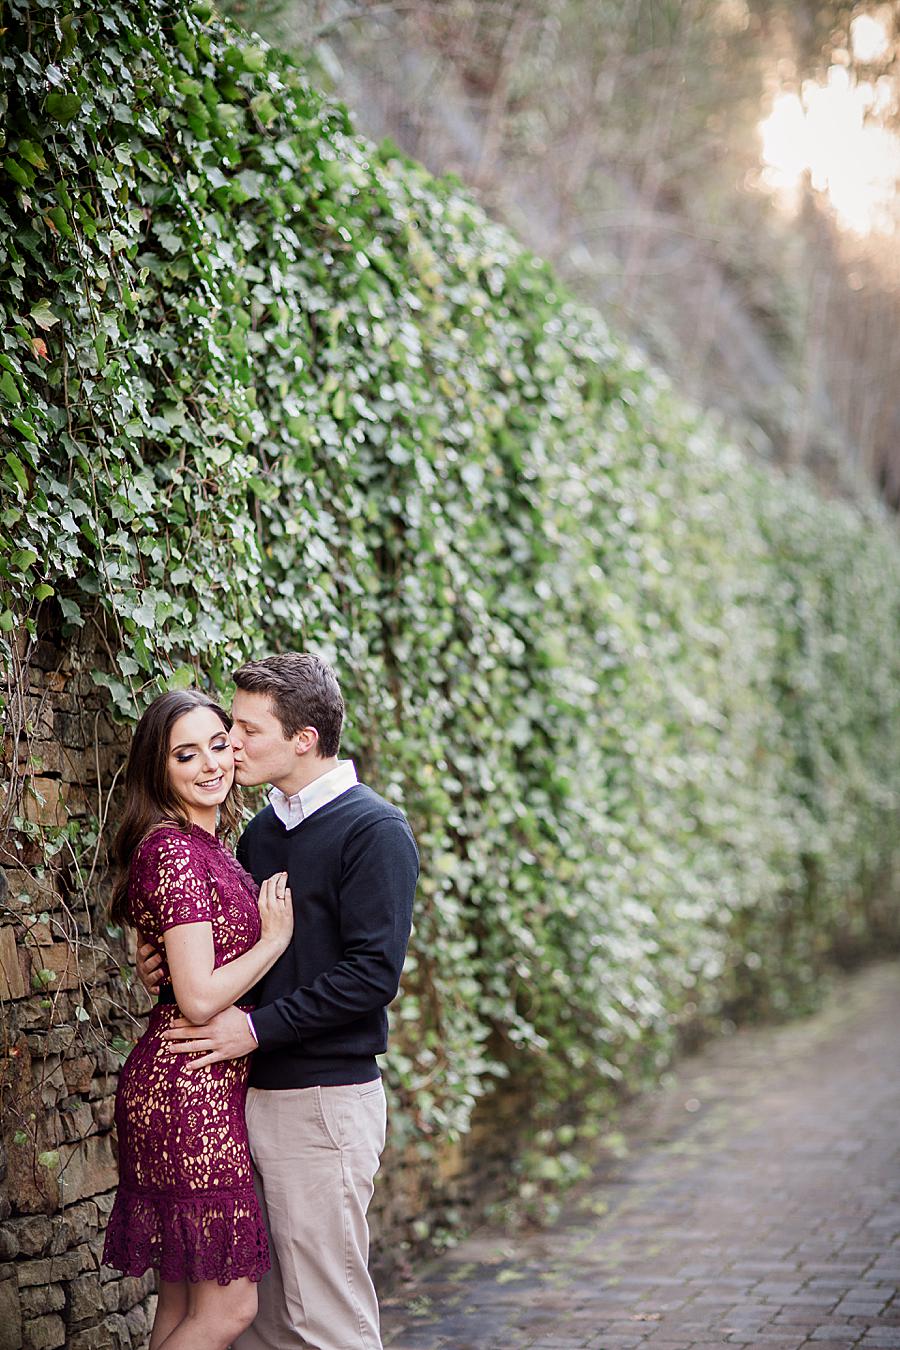 Ivy wall at this Smoky Mountain Engagement by Knoxville Wedding Photographer, Amanda May Photos.